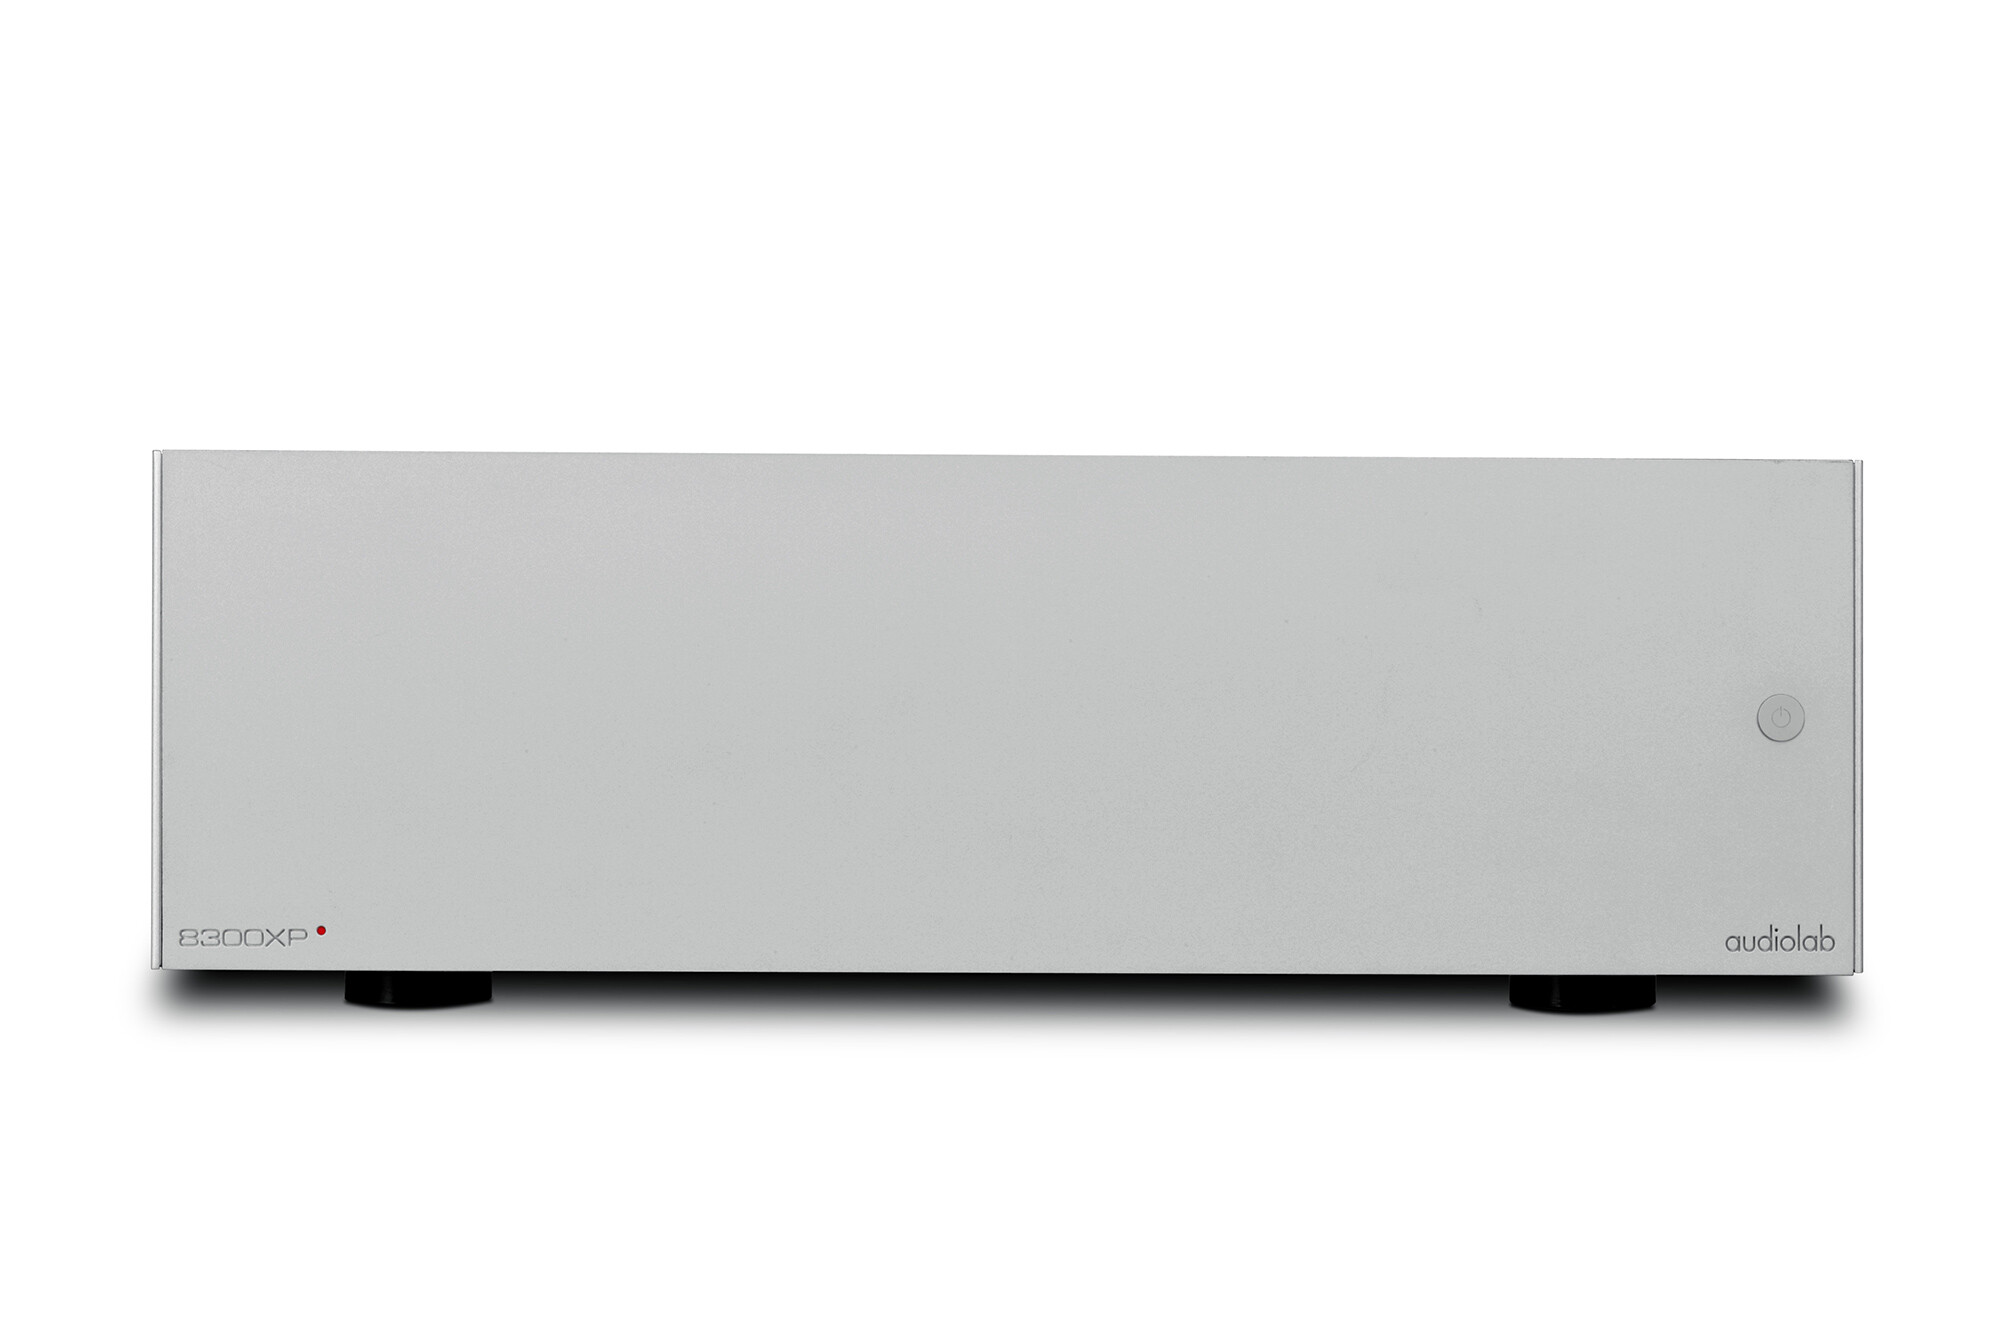 audiolab-8300XP-Stereo-Endstufe-Silber